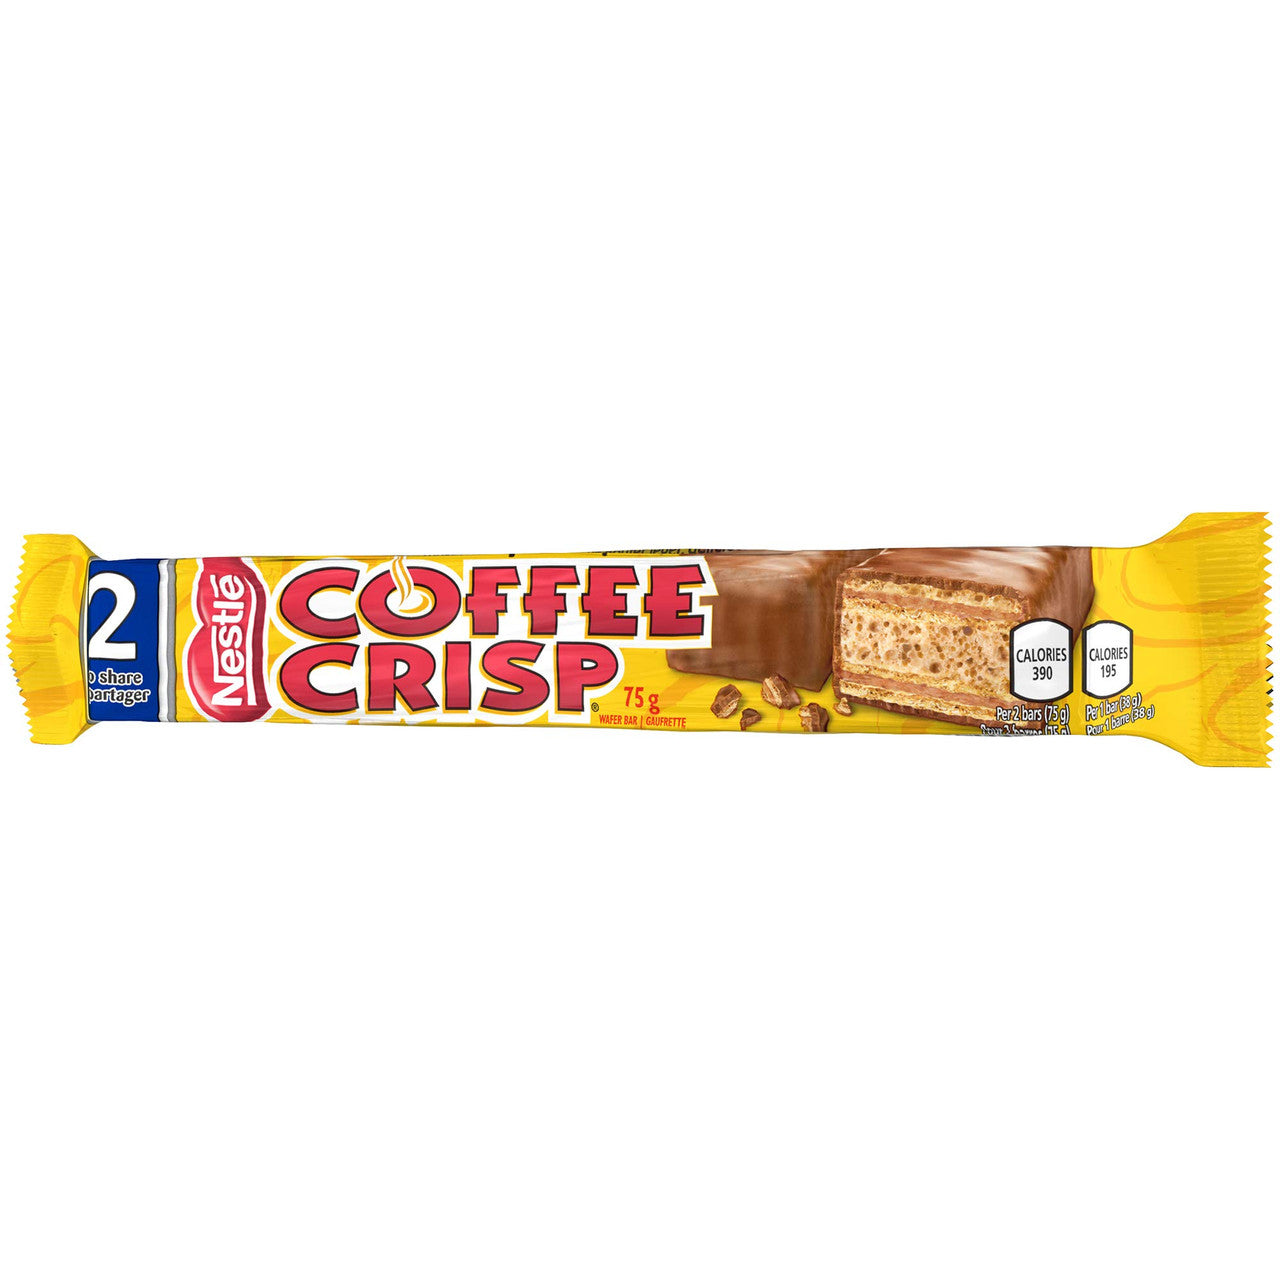 Nestle Coffee Crisp King Size, 10pk, 2 Bars in Each Pack, 75g/2.6 oz. Pack, {Imported from Canada}